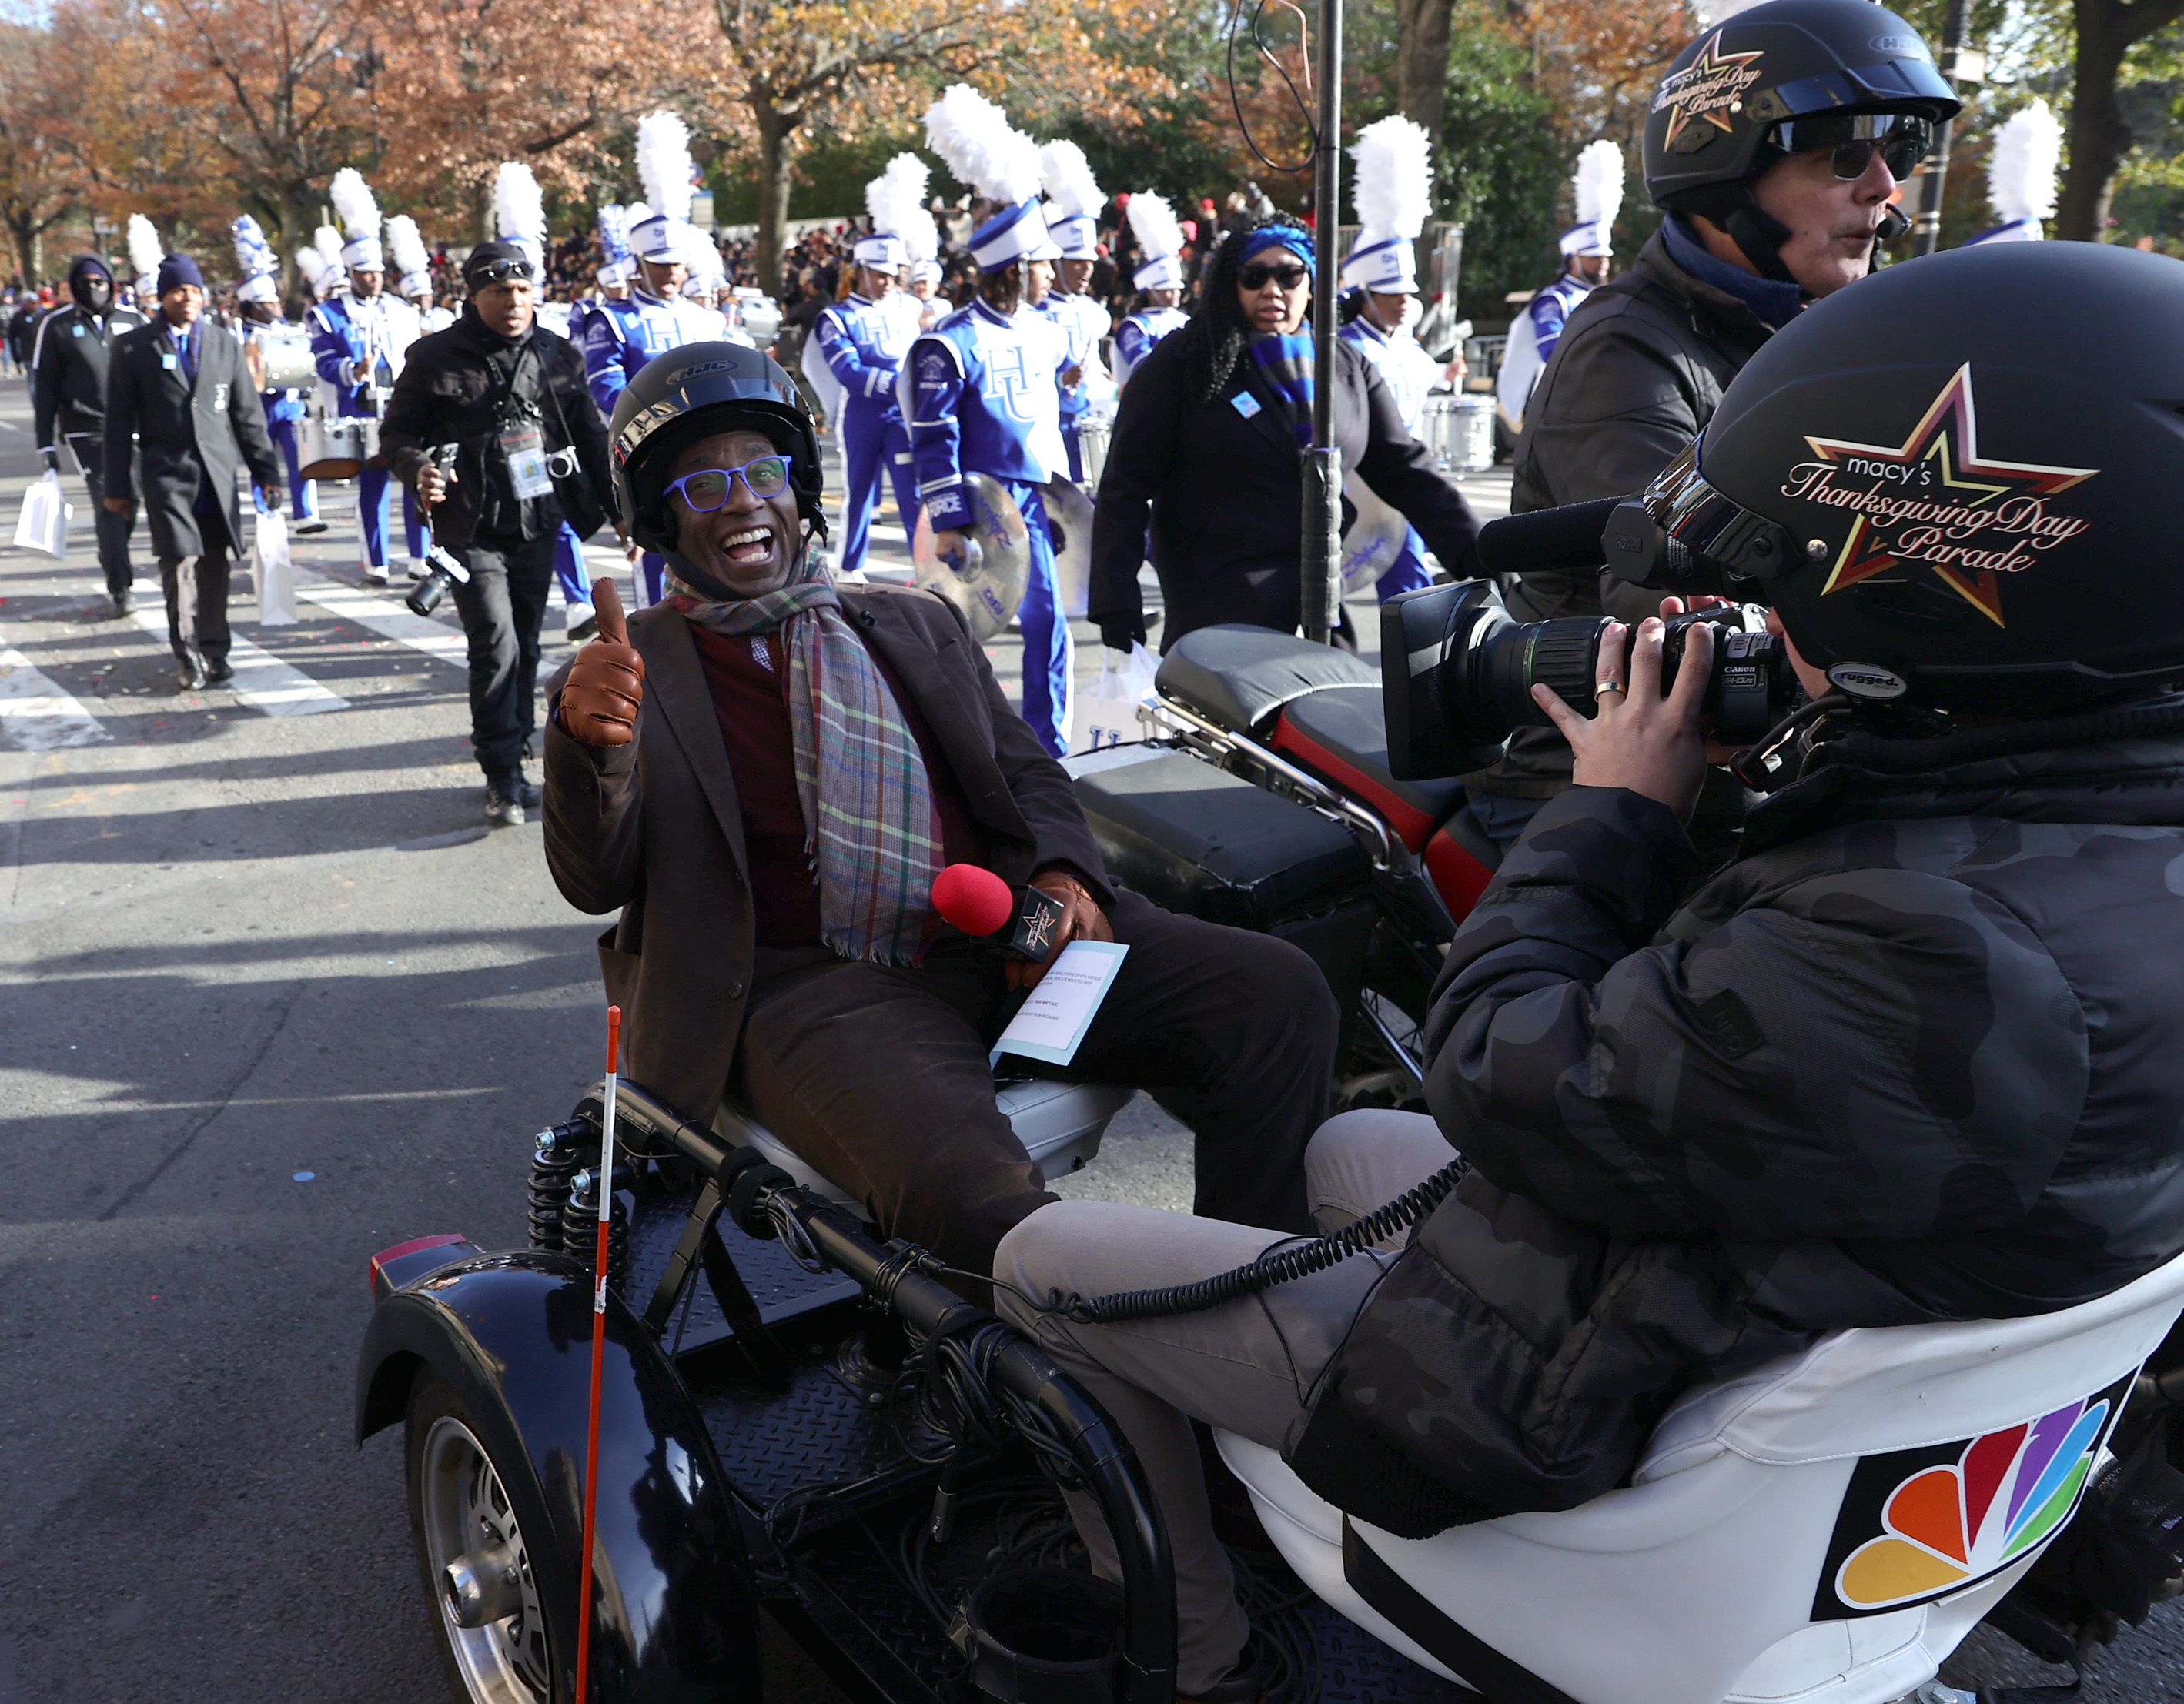 Al Roker attends the 95th Macy's Thanksgiving Day Parade